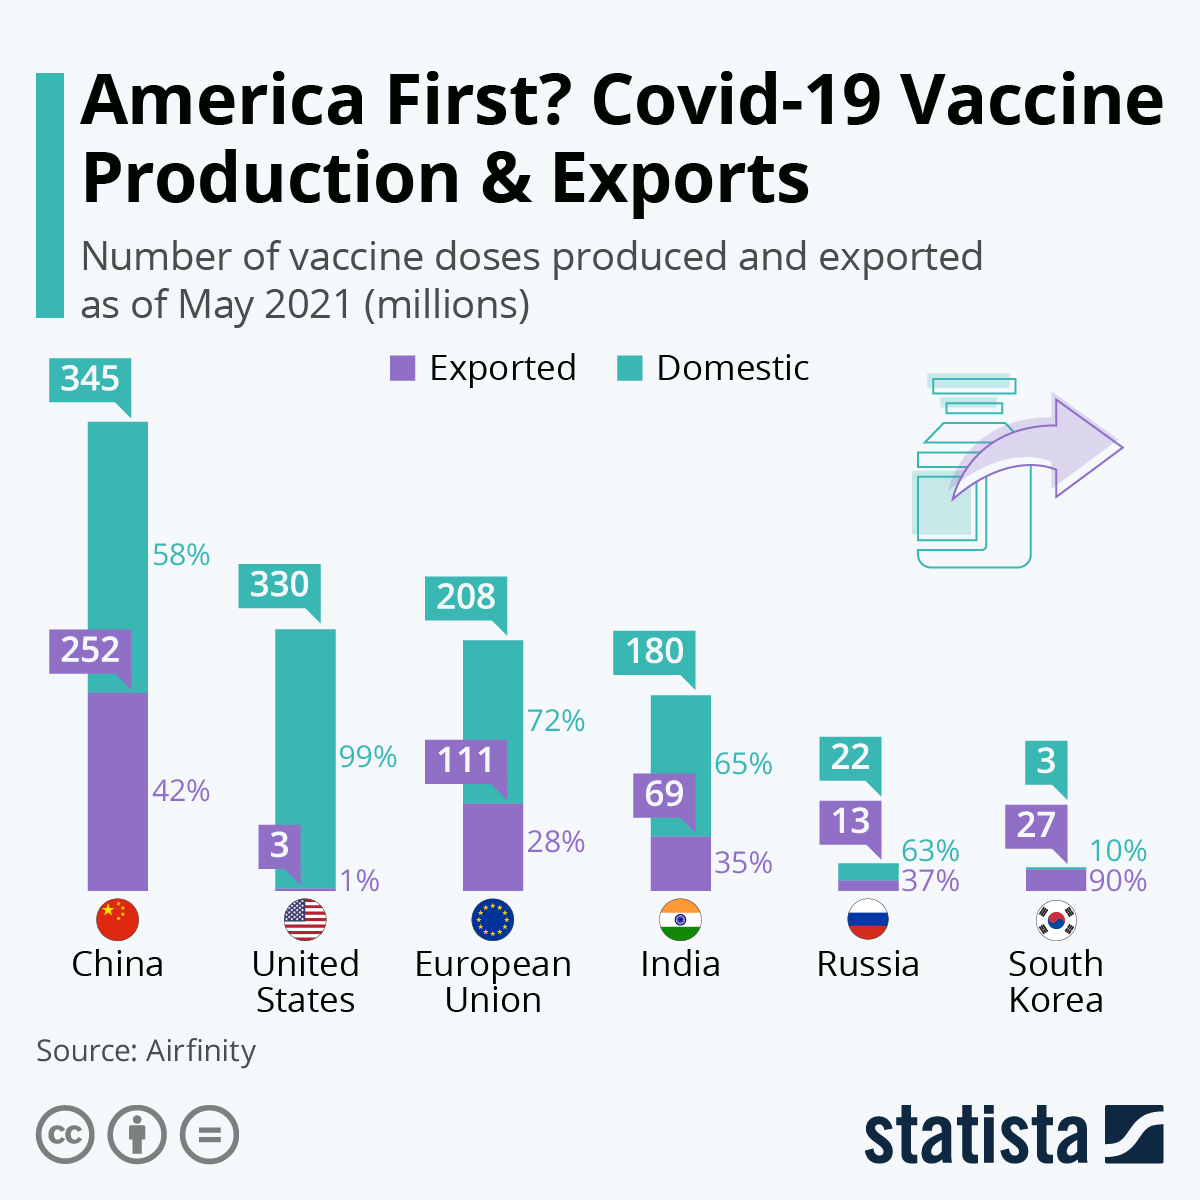 America First? Covid-19 Vaccine Production & Exports